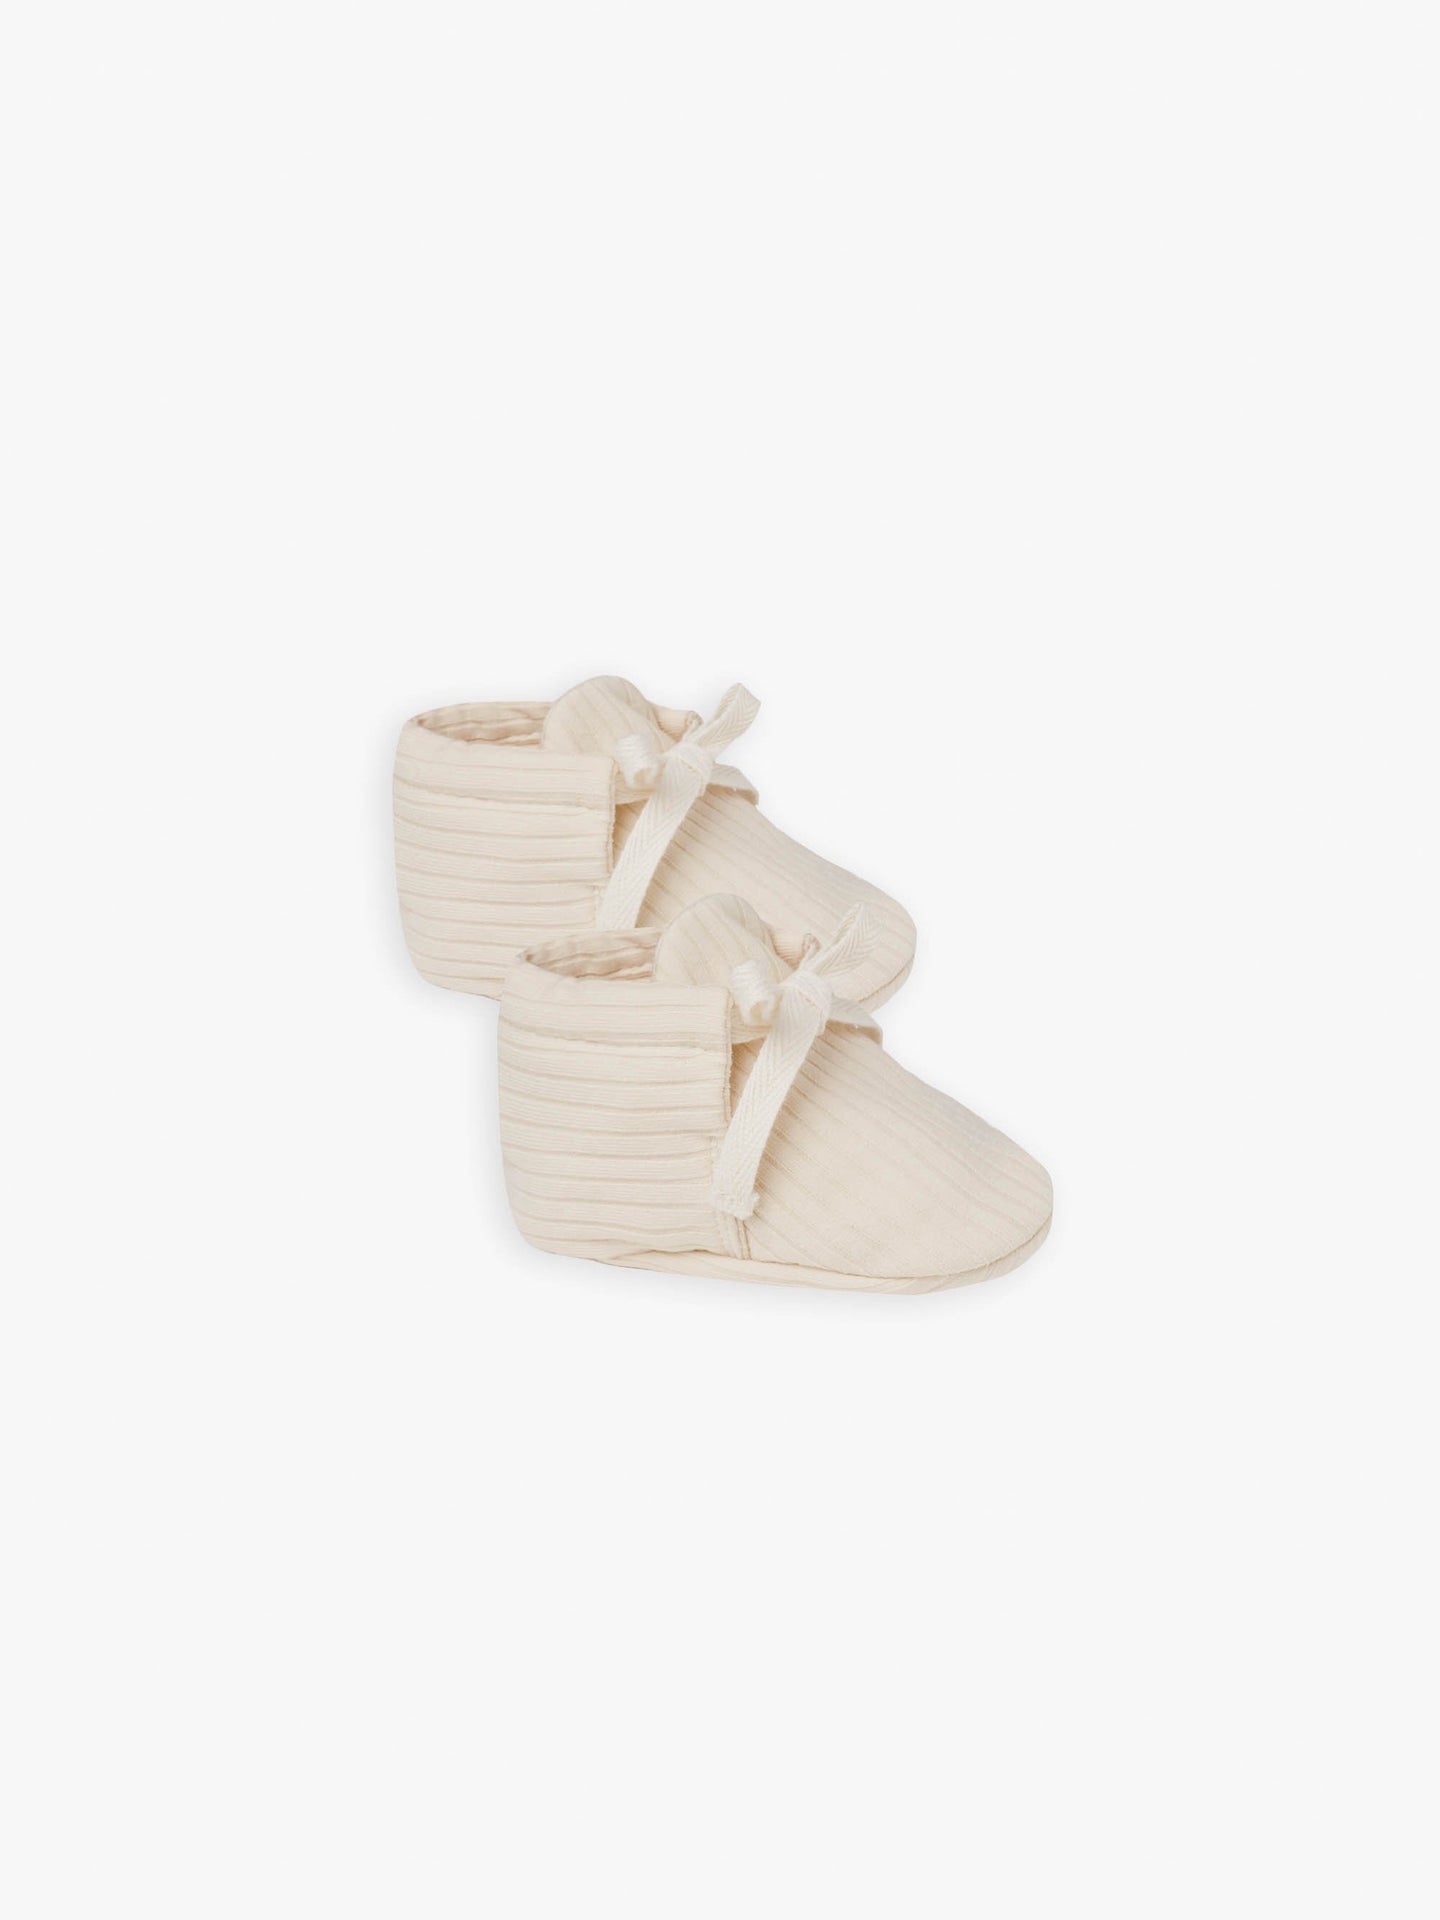 Quincy Mae - Organic Ribbed Baby Booties - Natural